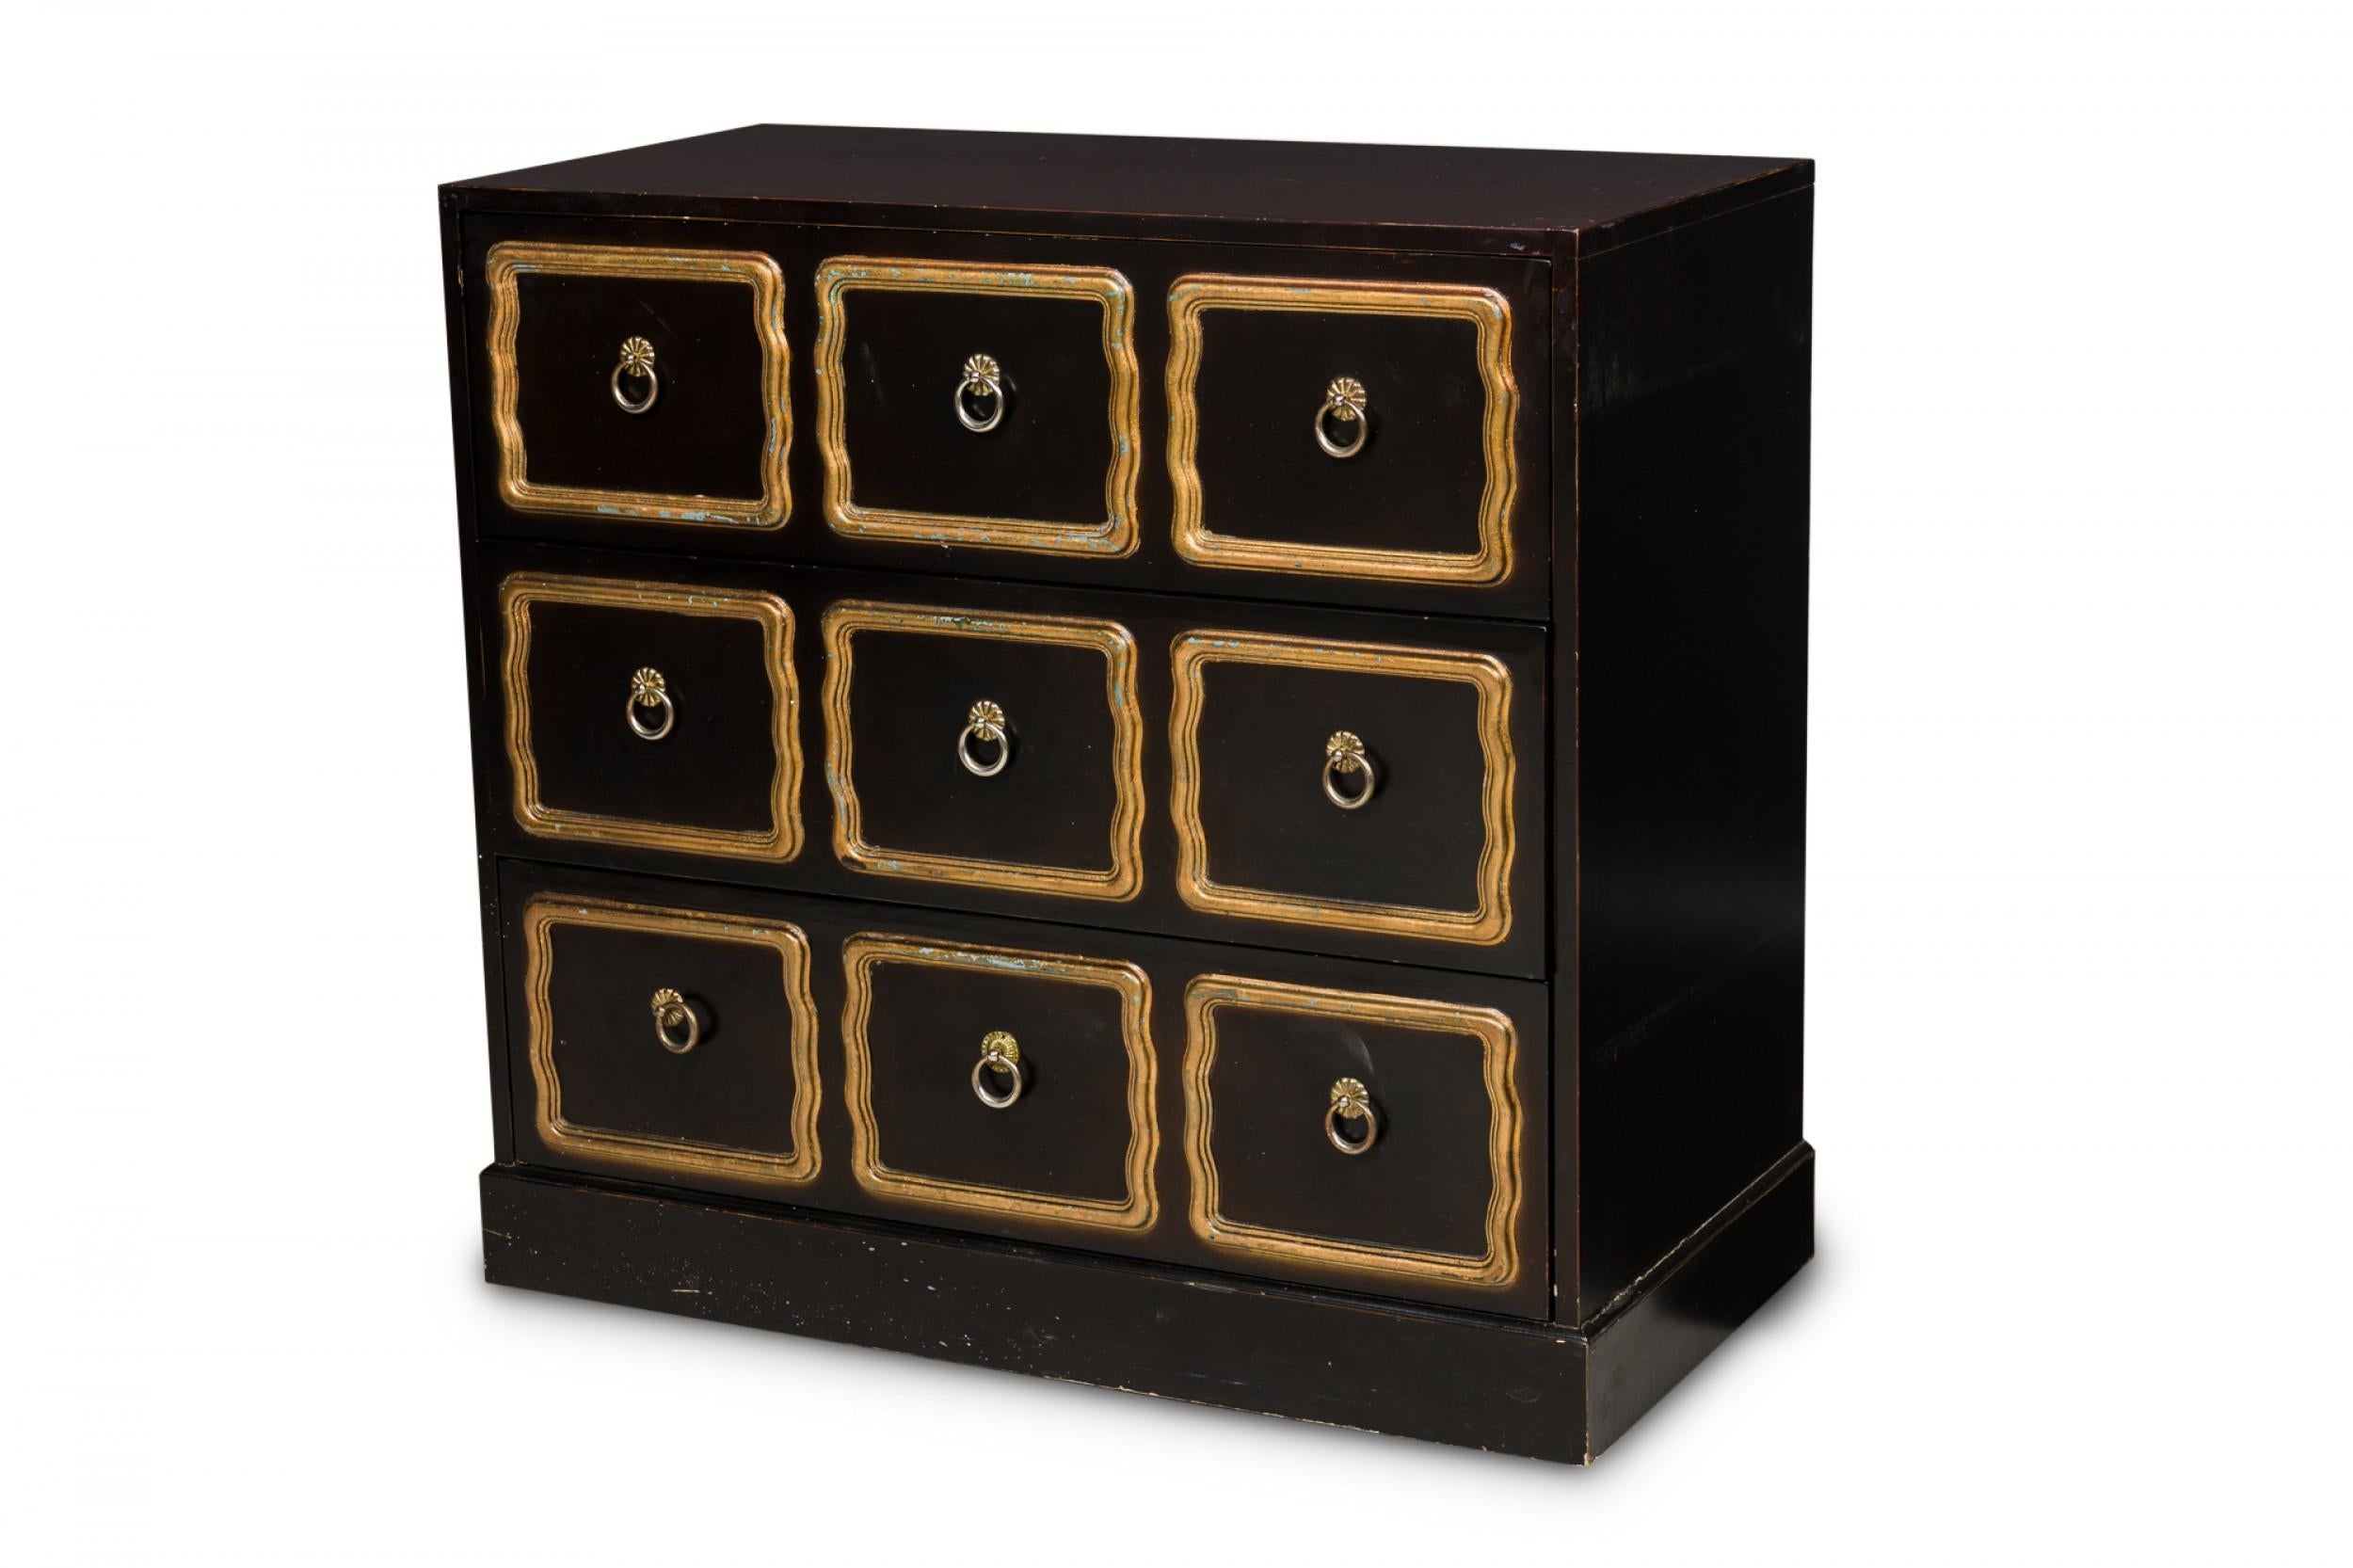 American midcentury chest of drawers painted in black, with 3-drawers with raised gold painted decorative molding on the drawer fronts surrounding three brass ring drawer pulls per drawer. (Dorothy Draper).